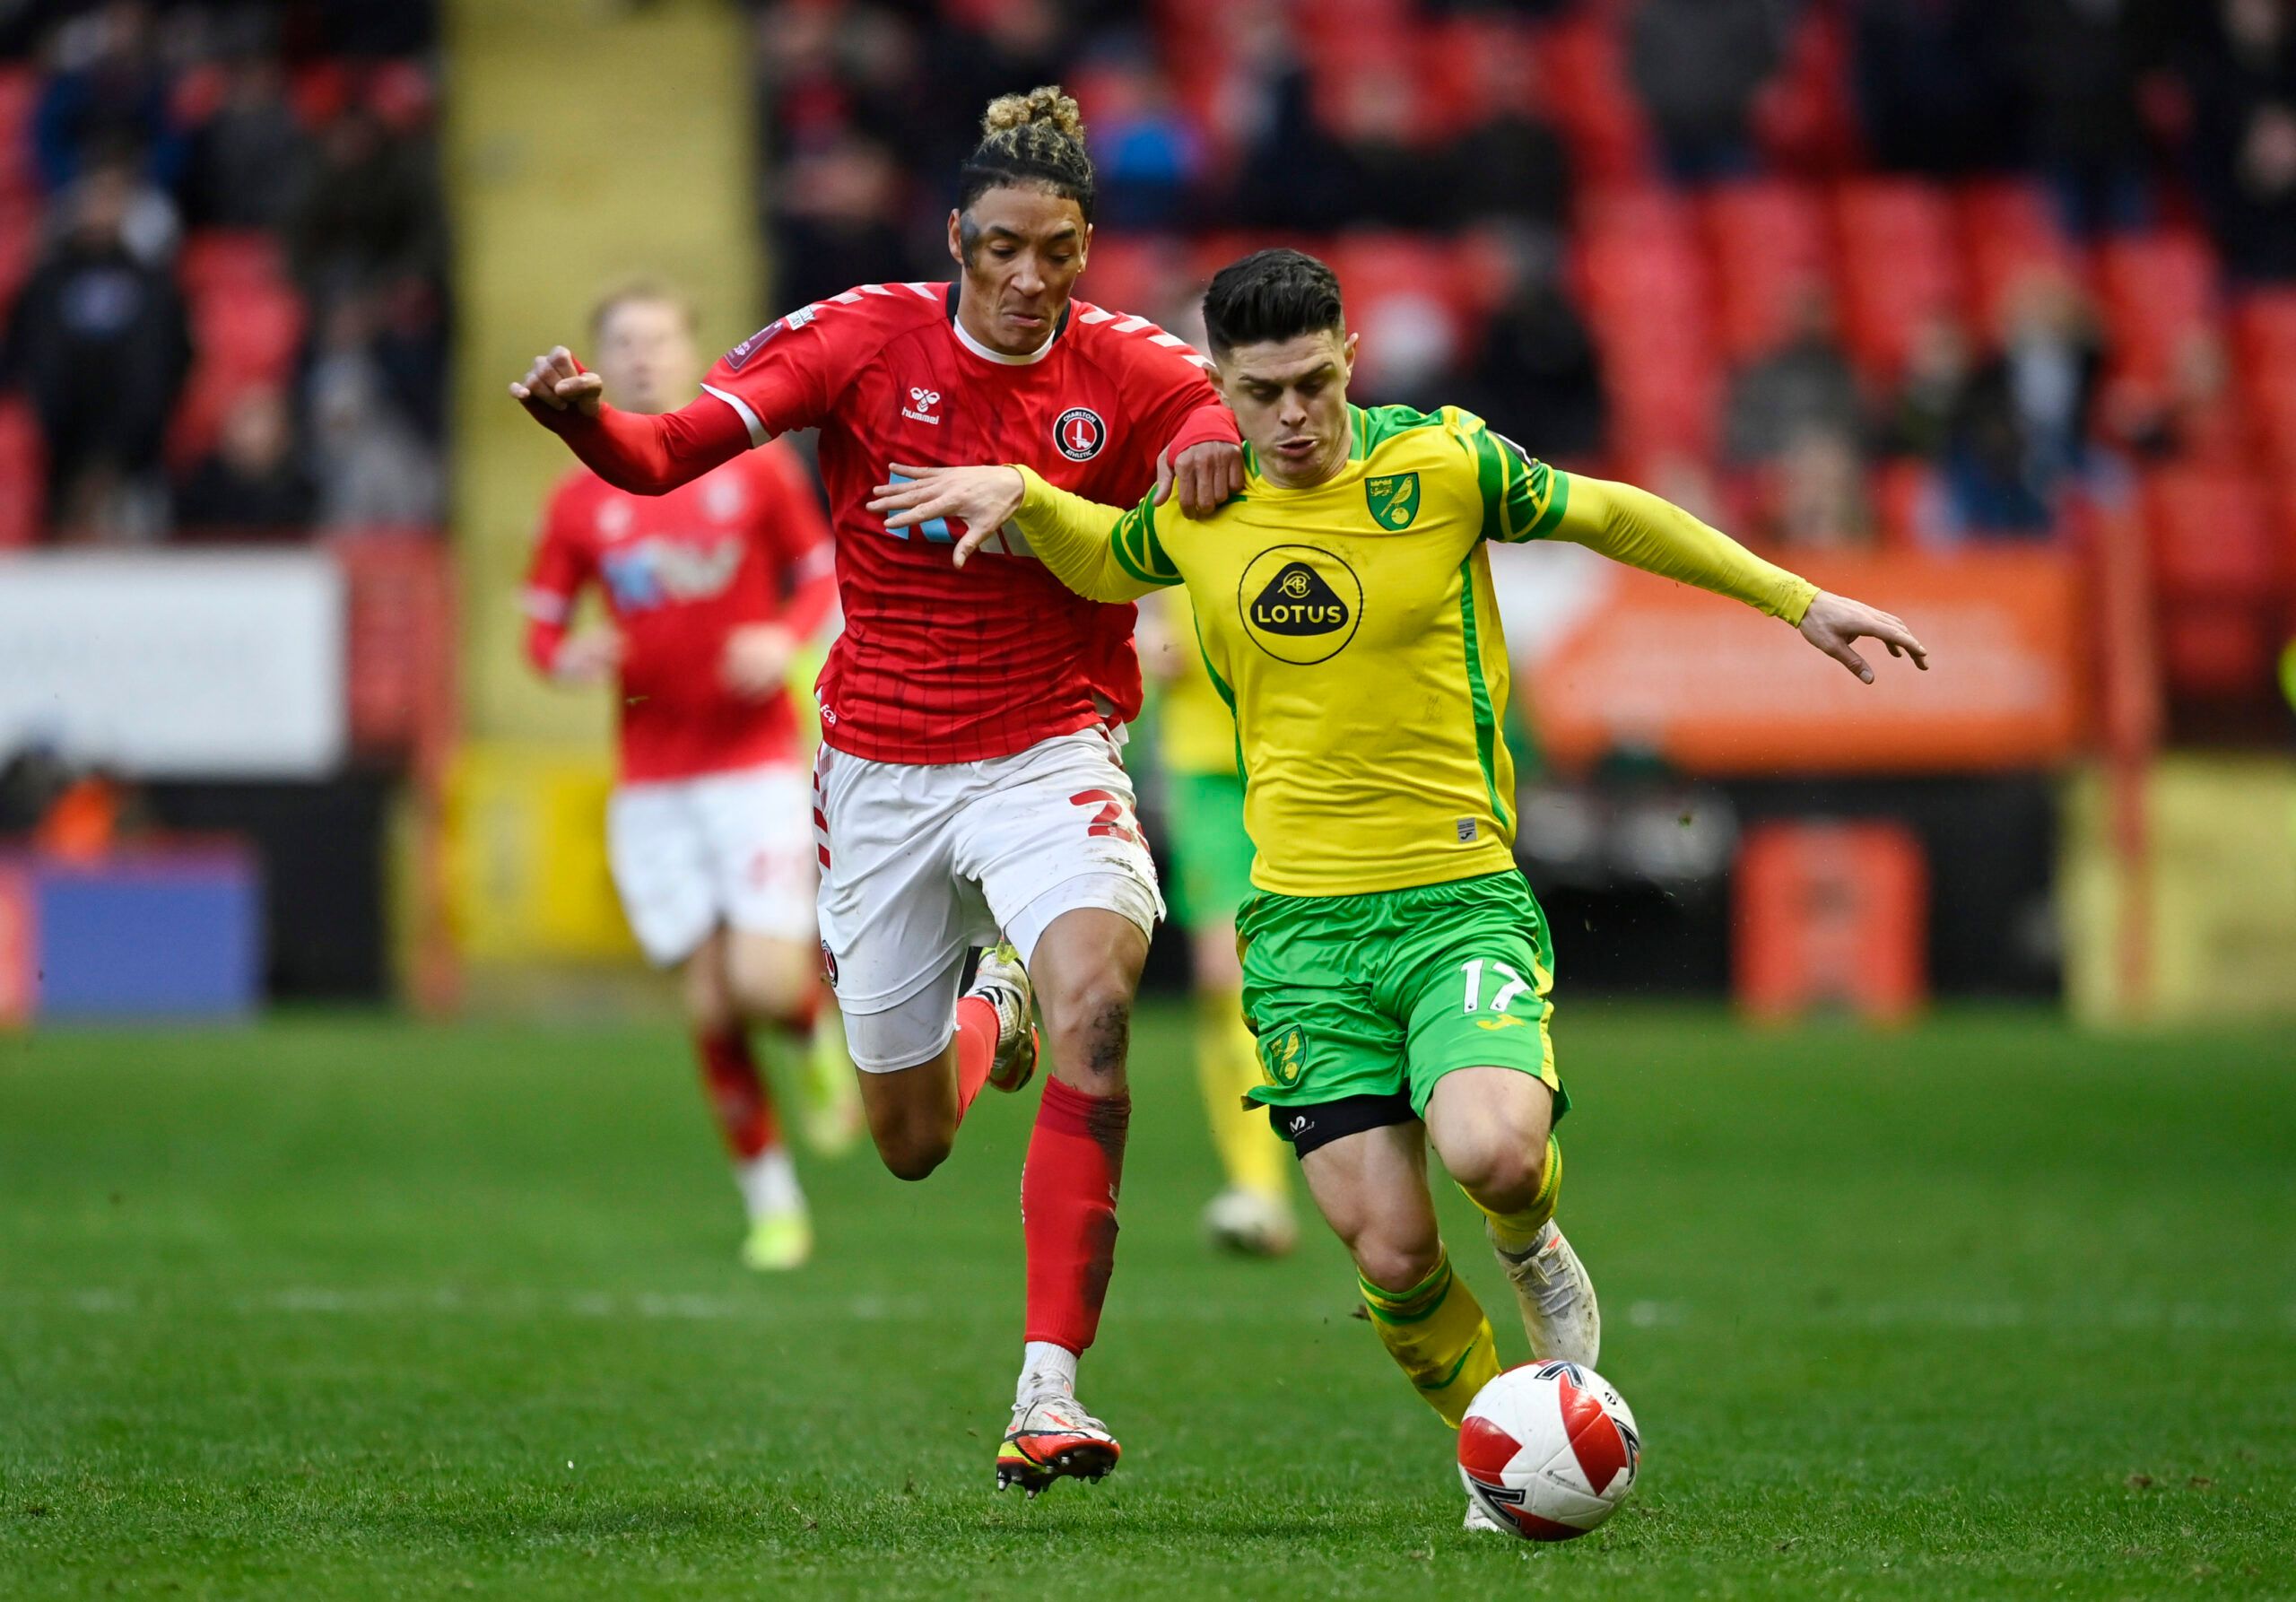 Soccer Football - FA Cup Third Round - Charlton Athletic v Norwich City - The Valley, London, Britain - January 9, 2022 Norwich City's Milot Rashica in action with Charlton Athletic's Sean Clare REUTERS/Tony Obrien